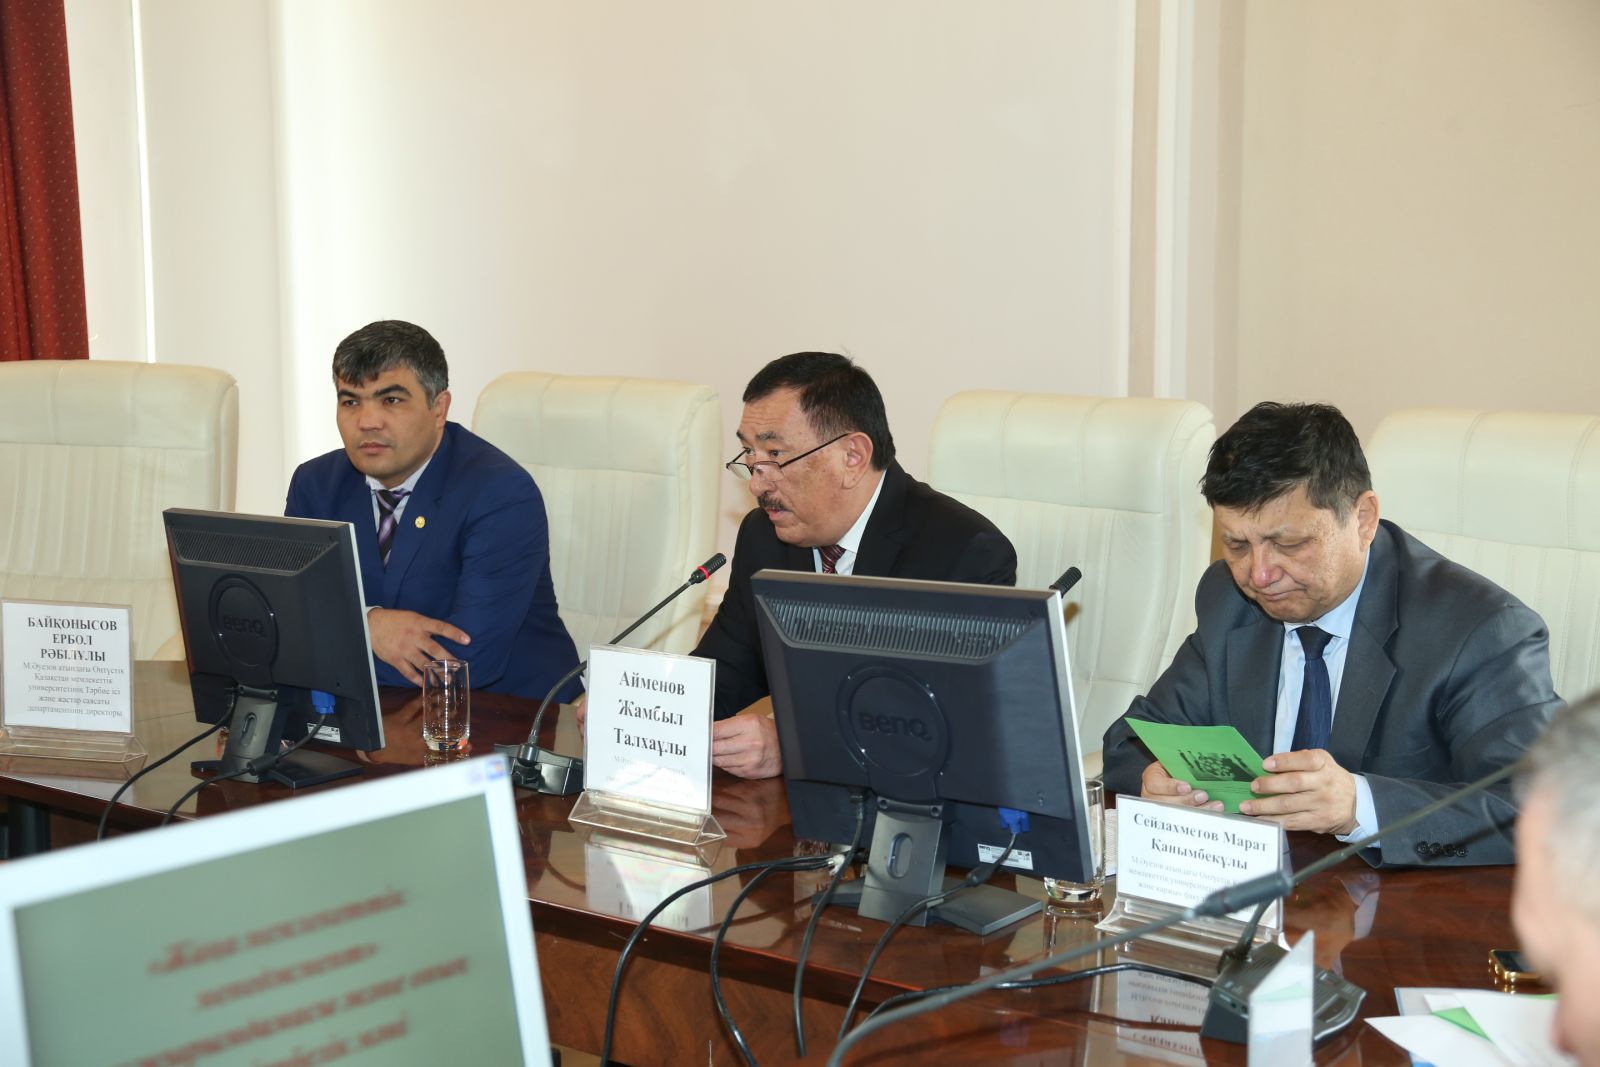 Modernization of public administration is a reflection of democratic values